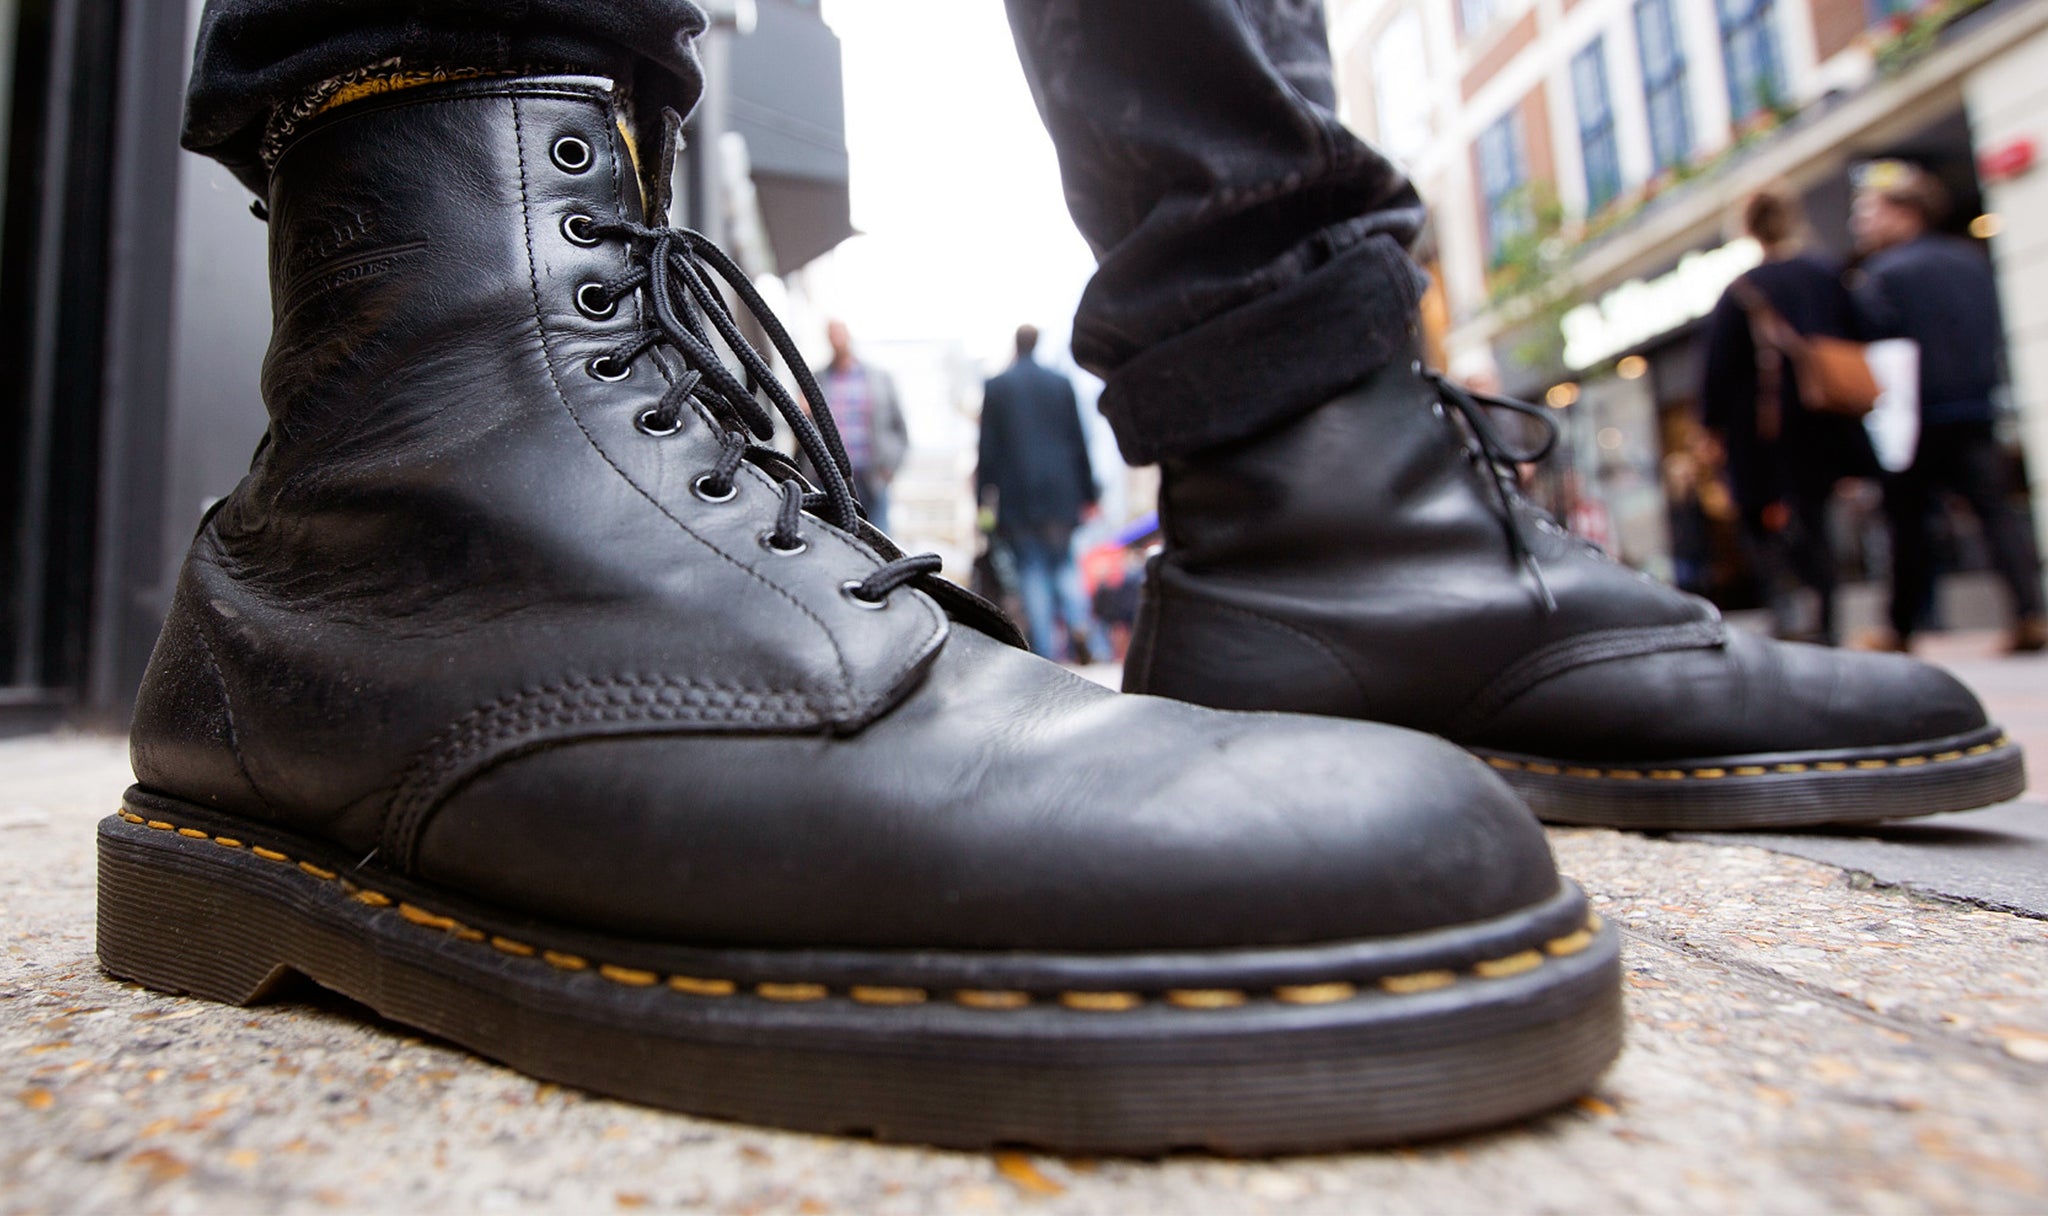 Dr. Martens Boots Available in Santa Ana